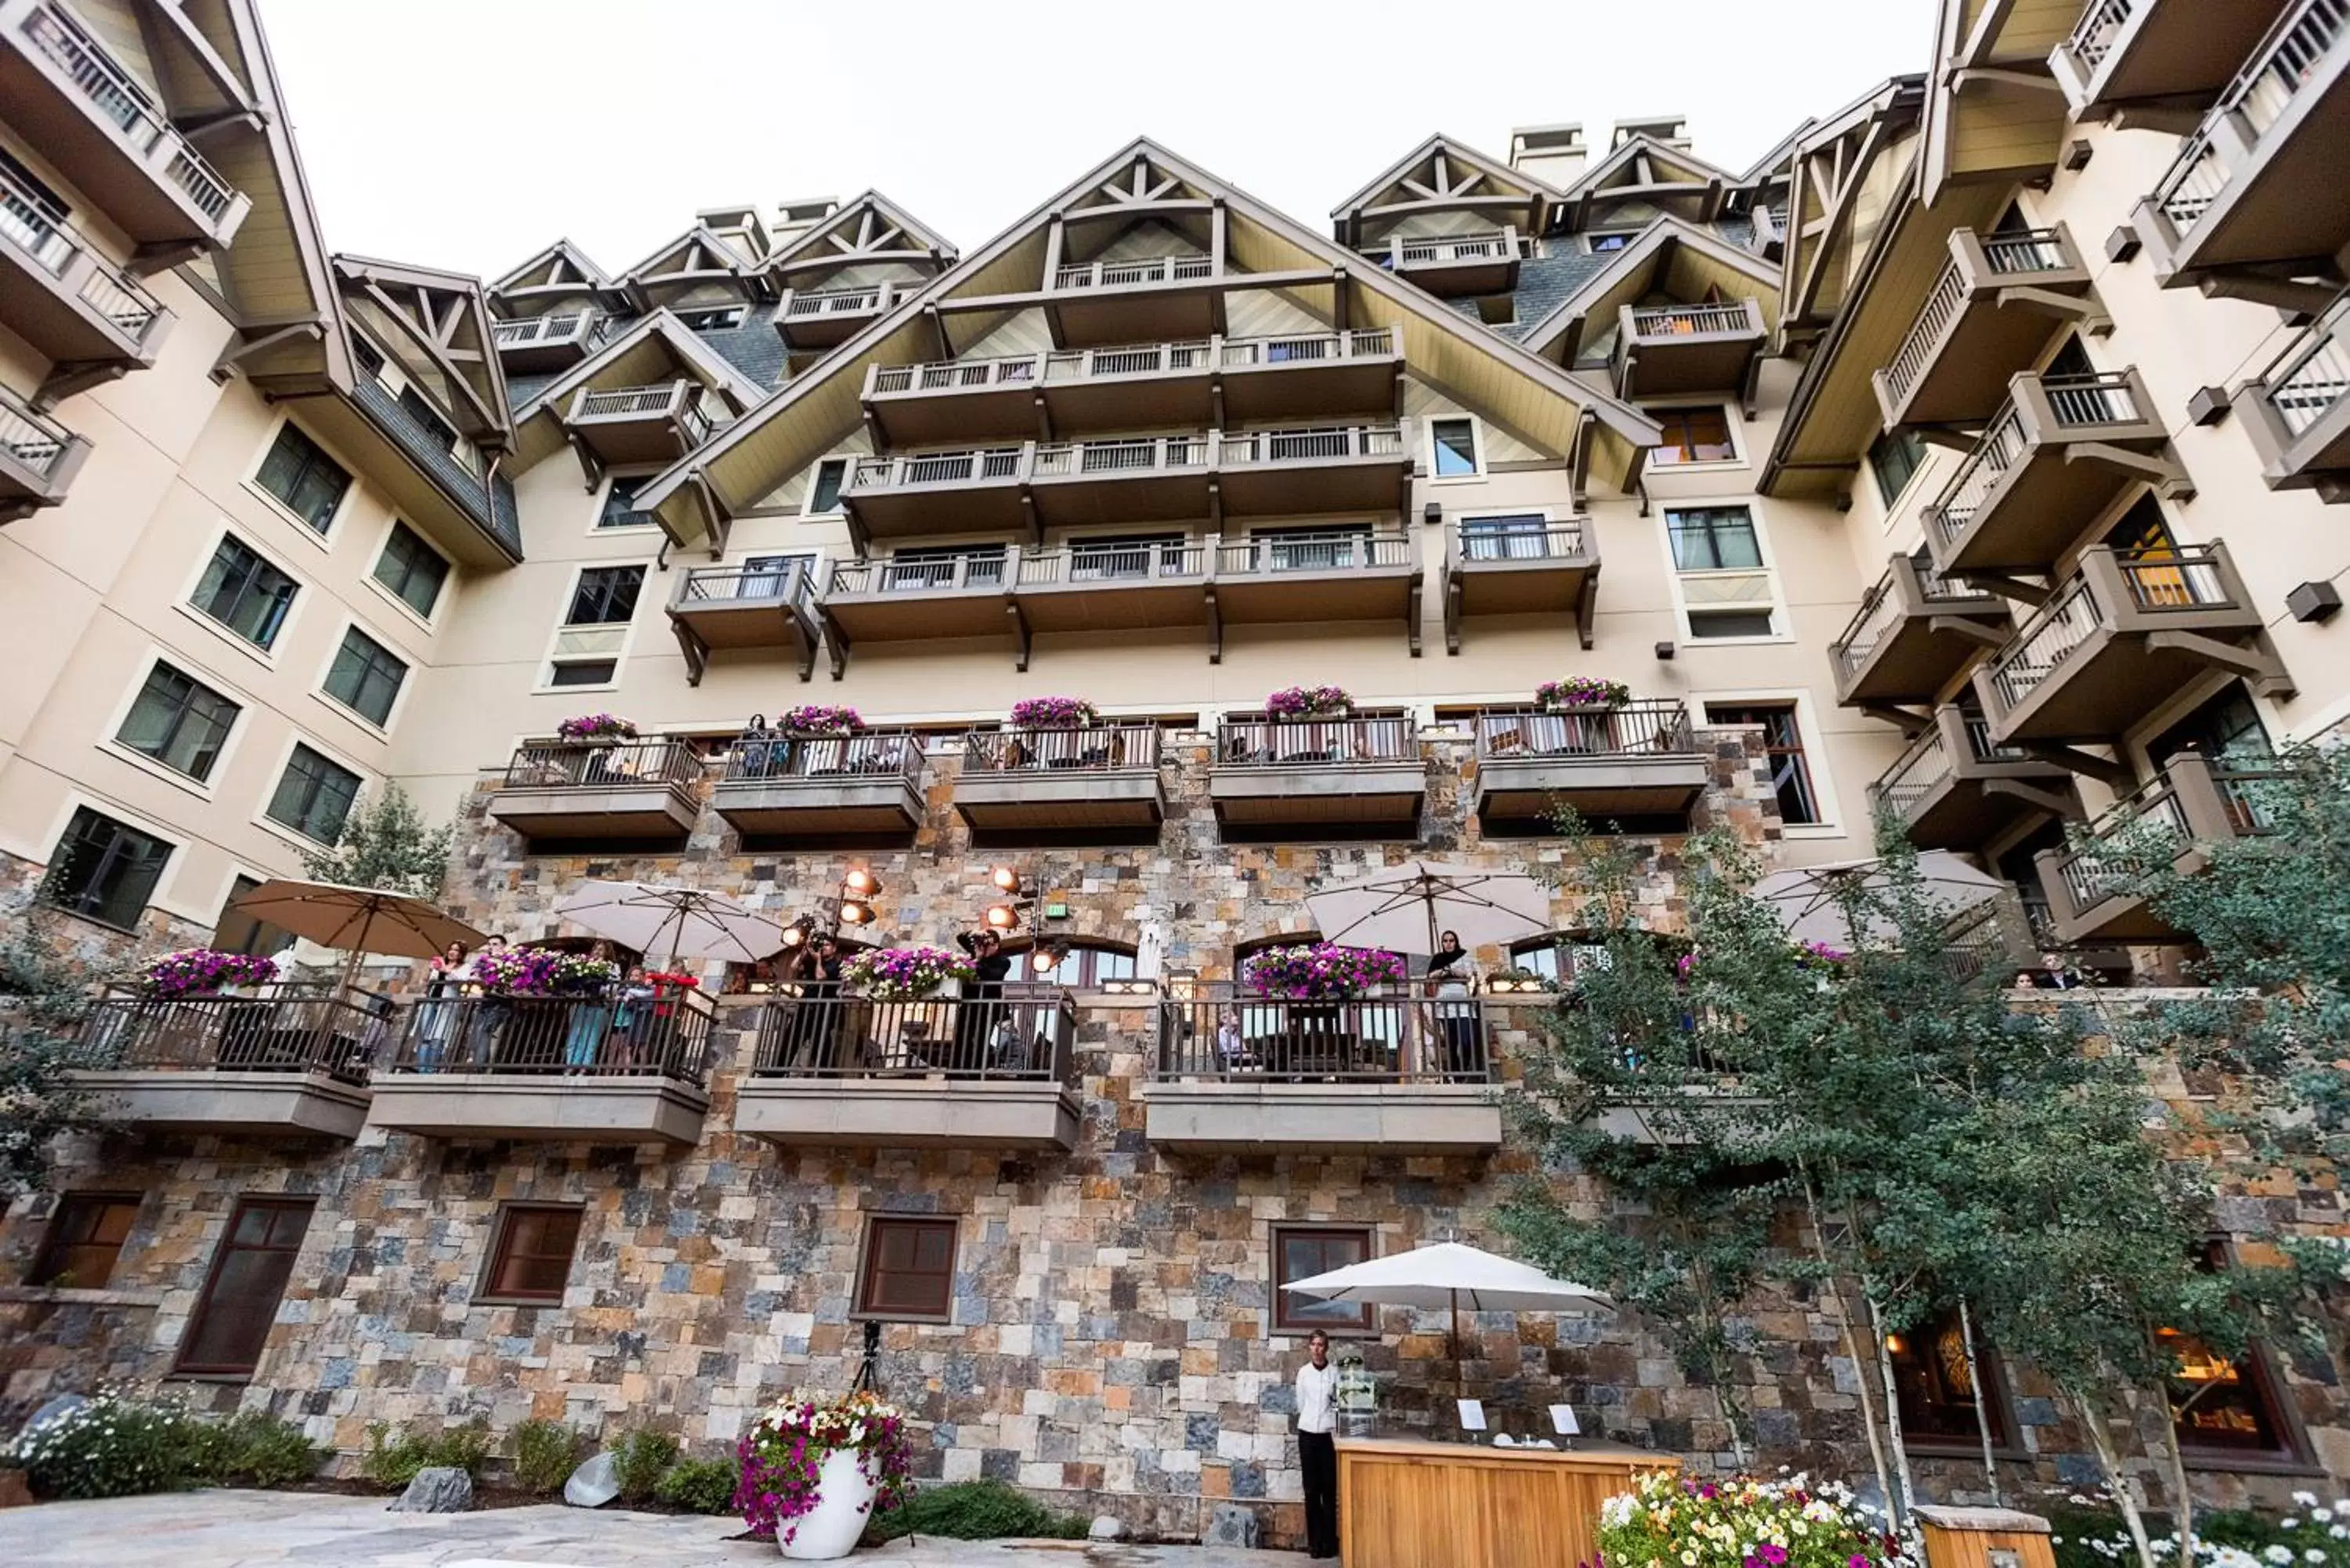 Property Building in Four Seasons Resort Vail